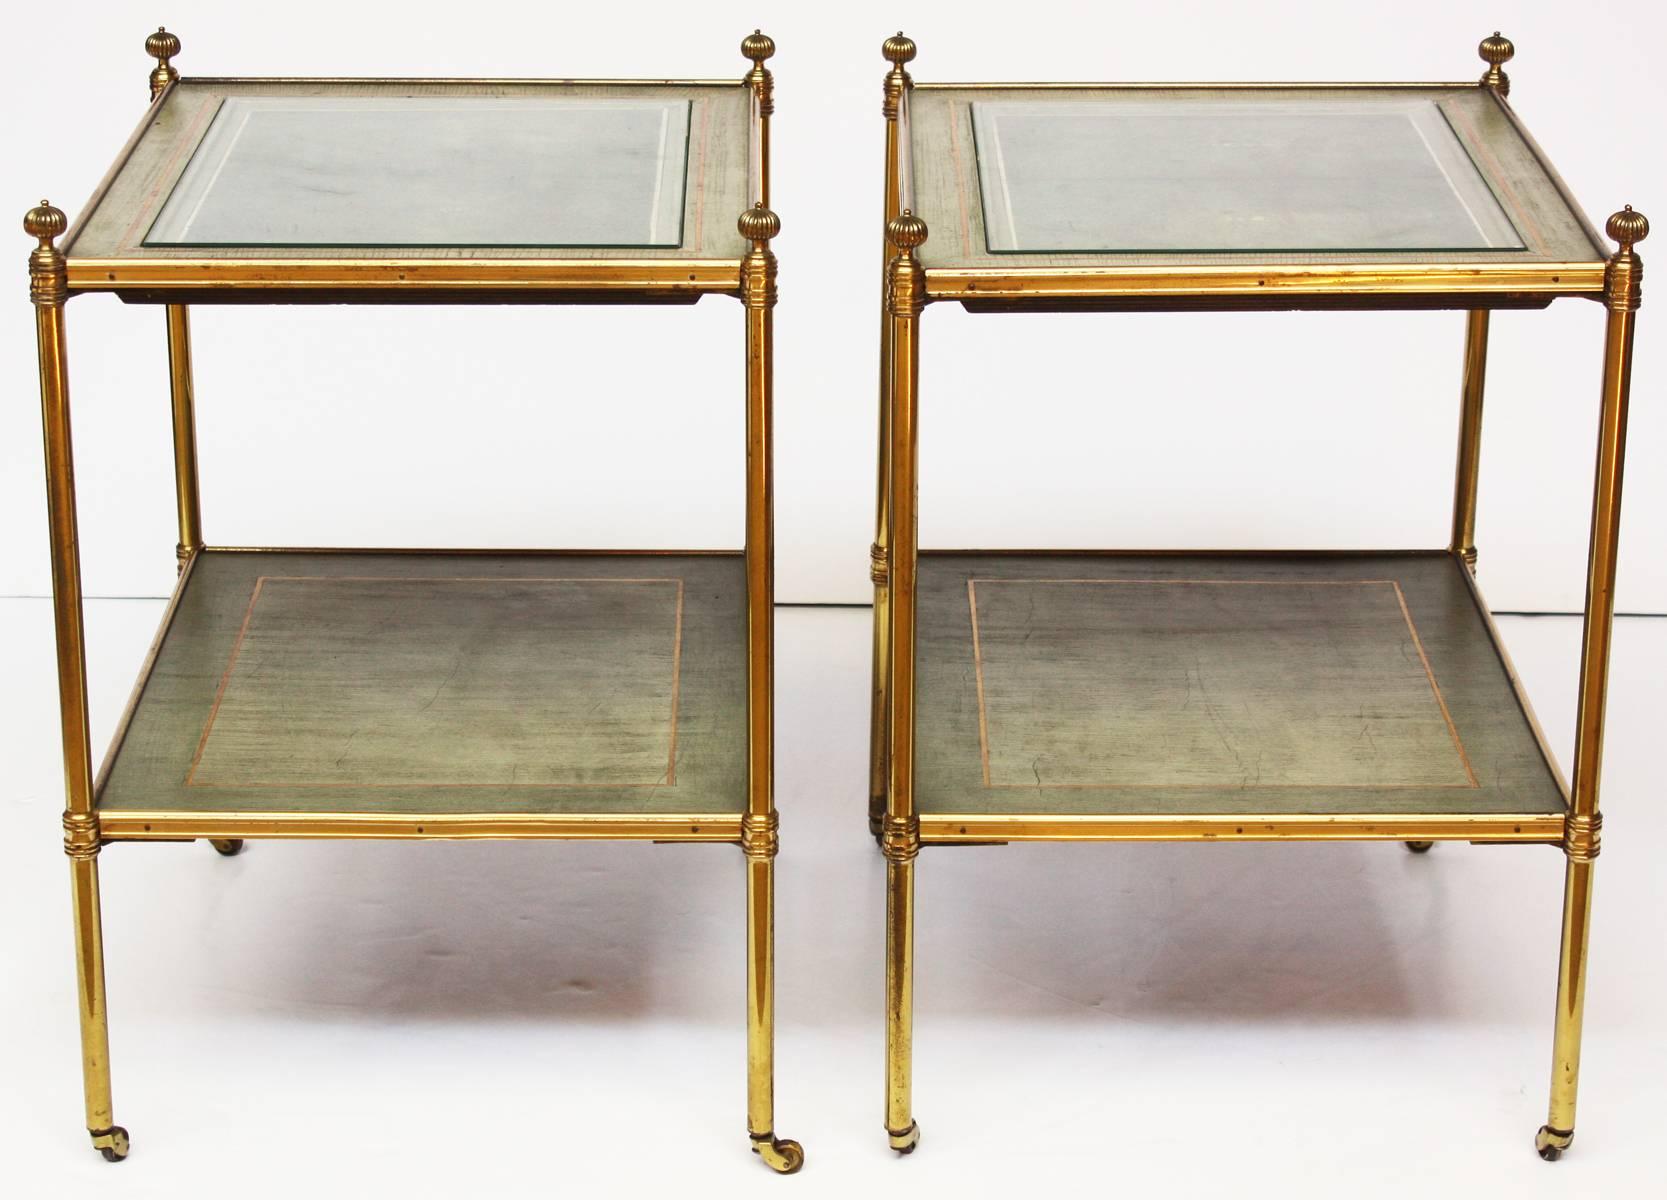 Pair of Baguès side tables featuring inset bookmatched shagreen under glass with parchment and gilt banded border, over a matching parchment with gilt band shelf stretcher, in brass frames with short legs resting on casters, circa 1945.